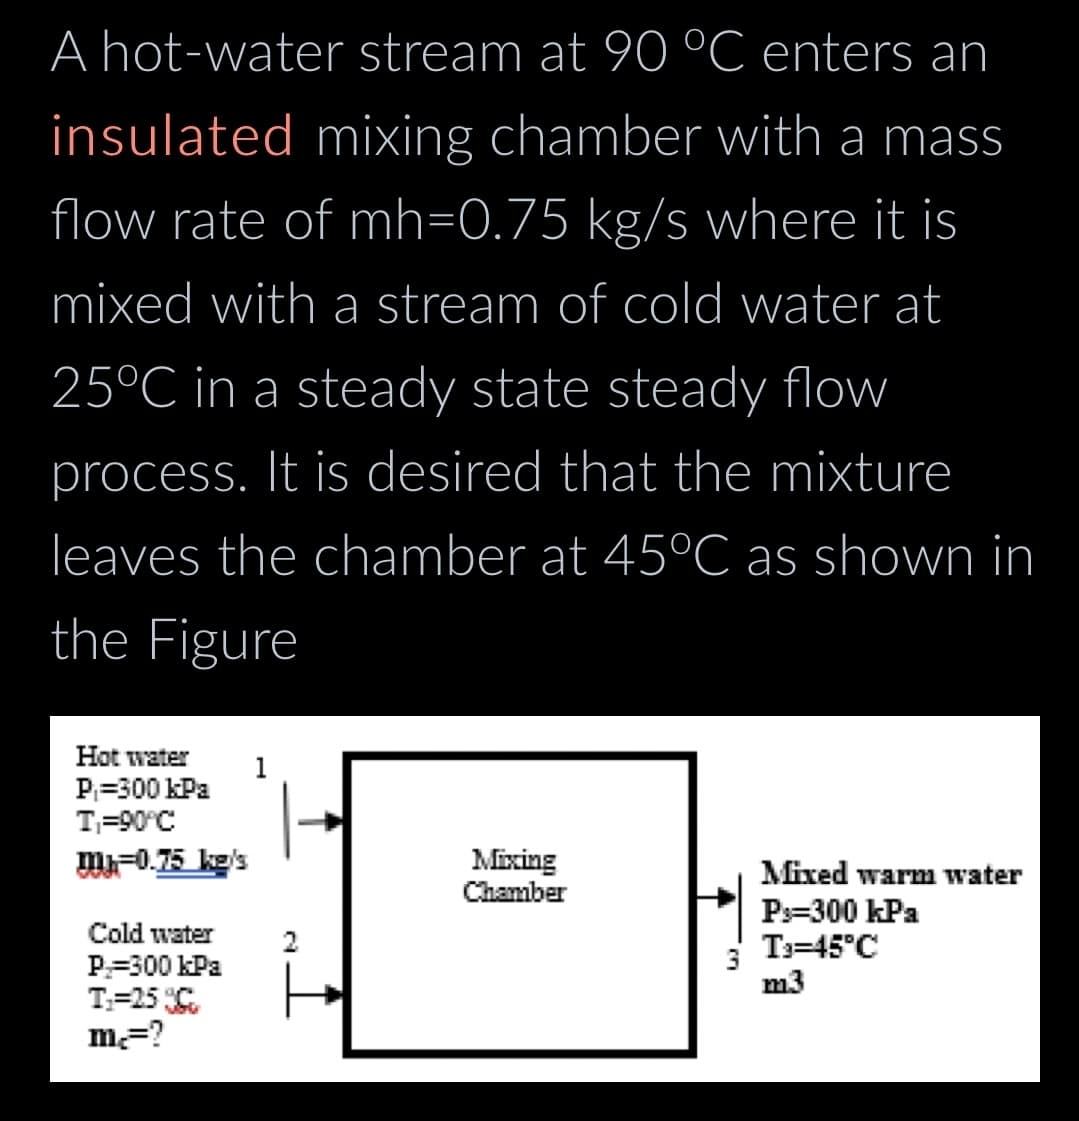 A hot-water stream at 90 °C enters an
insulated mixing chamber with a mass
flow rate of mh=0.75 kg/s where it is
mixed with a stream of cold water at
25°℃ in a steady state steady flow
process. It is desired that the mixture
leaves the chamber at 45°C as shown in
the Figure
Hot water
P₁=300 kPa
T₁=90°C
-0.75 kg/s
Cold water
P-300 kPa
T₁=25%
m=?
1
2
Mixing
Chamber
3
Mixed warm water
P-300 kPa
T=45°C
m3